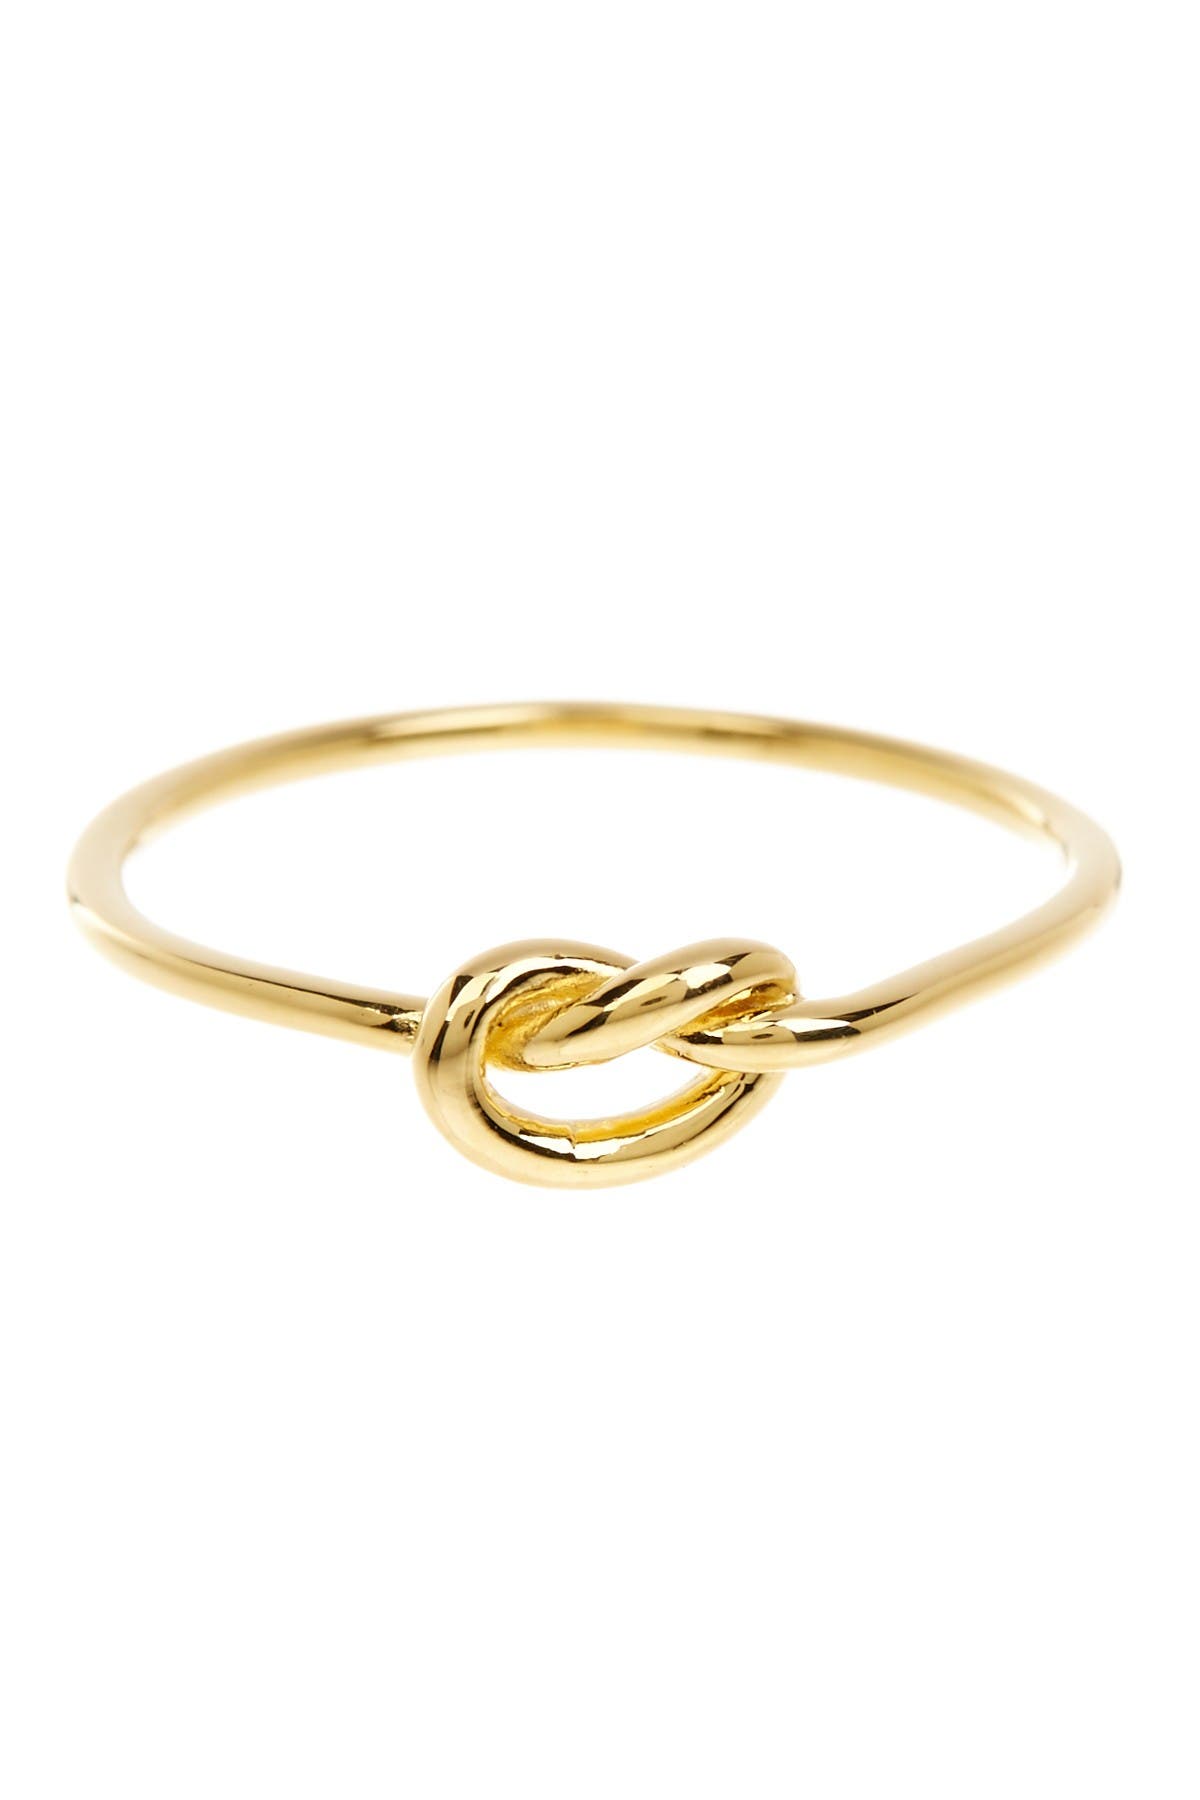 14K Gold Filled Ring Love Knot Band  sizes 3-12